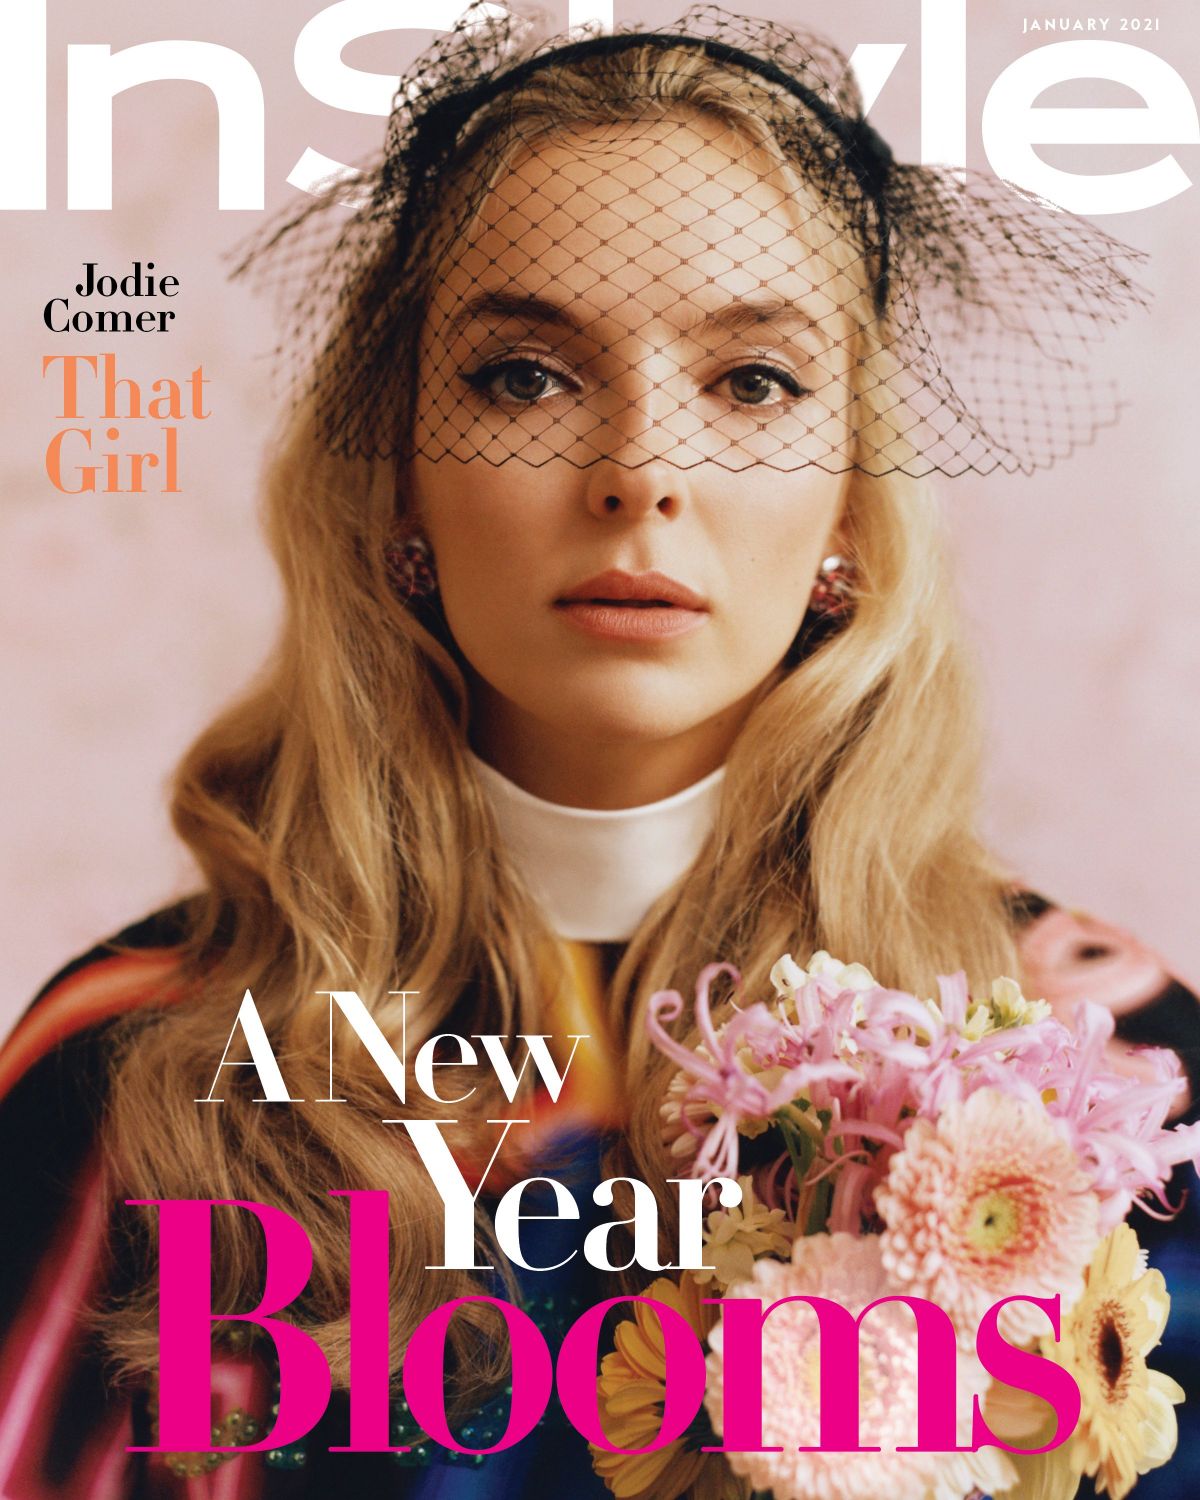 jodie-comer-for-instyle-magazine-january-2021-14.jpg